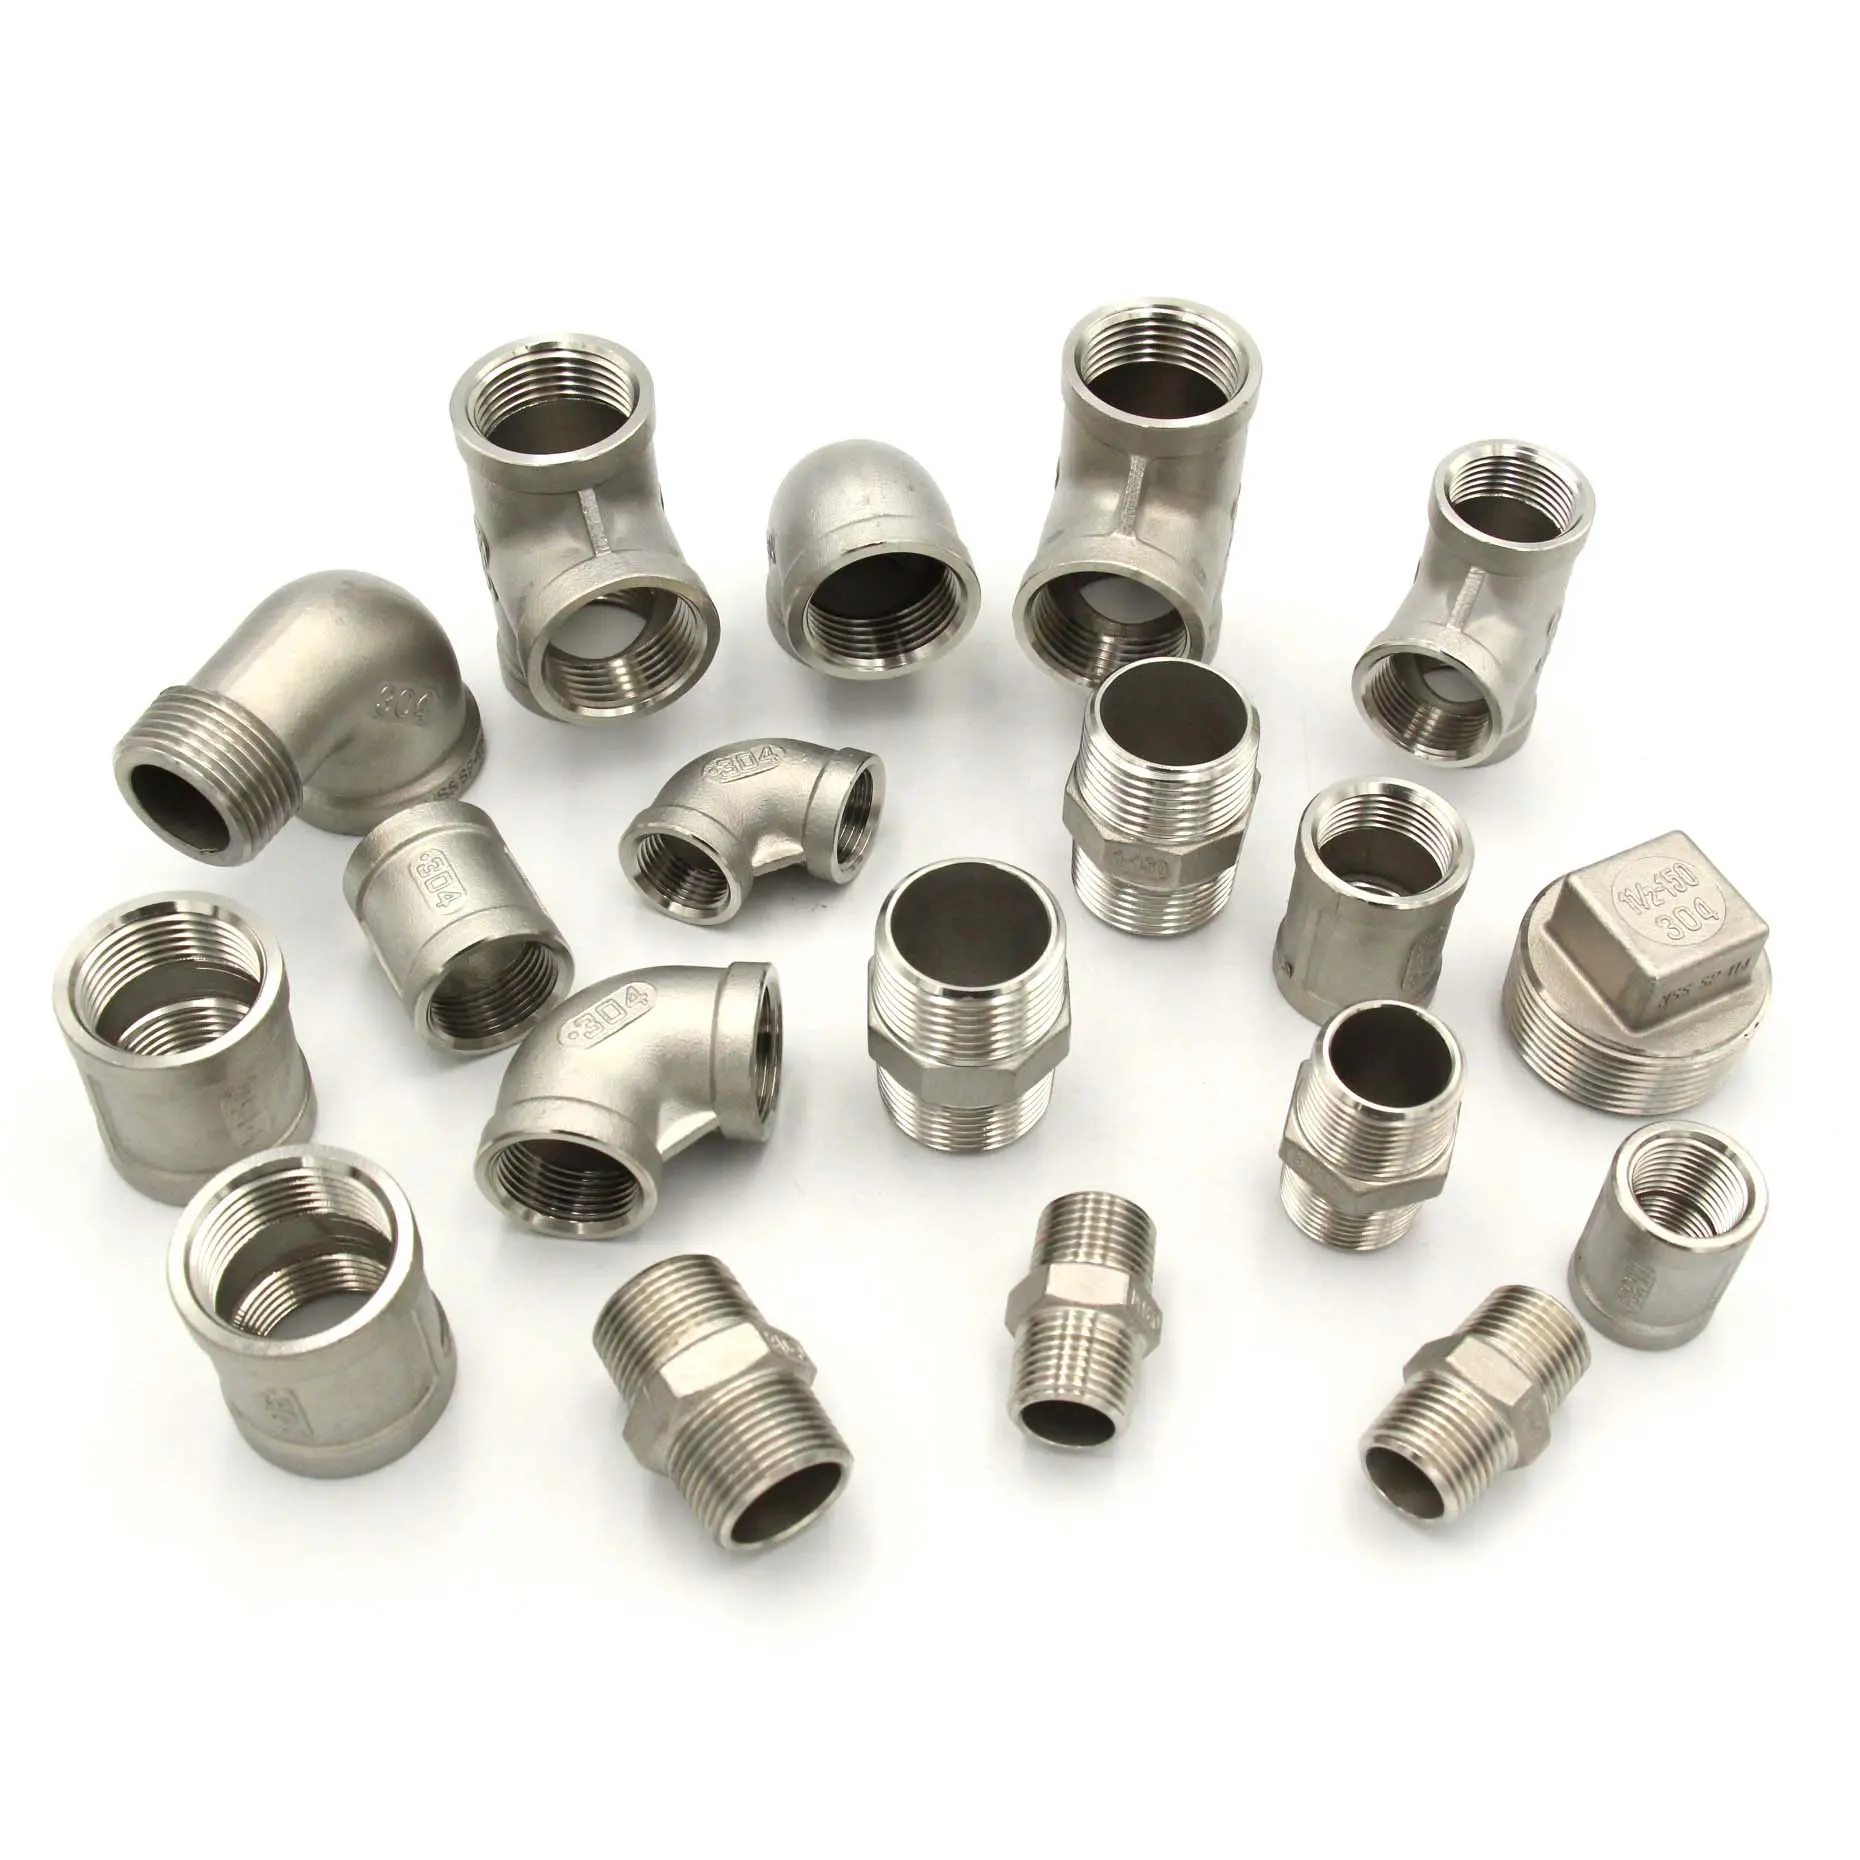 casting pipe fittings price gi nipple 150lb pipe fitting stainless steel iron threaded fitting